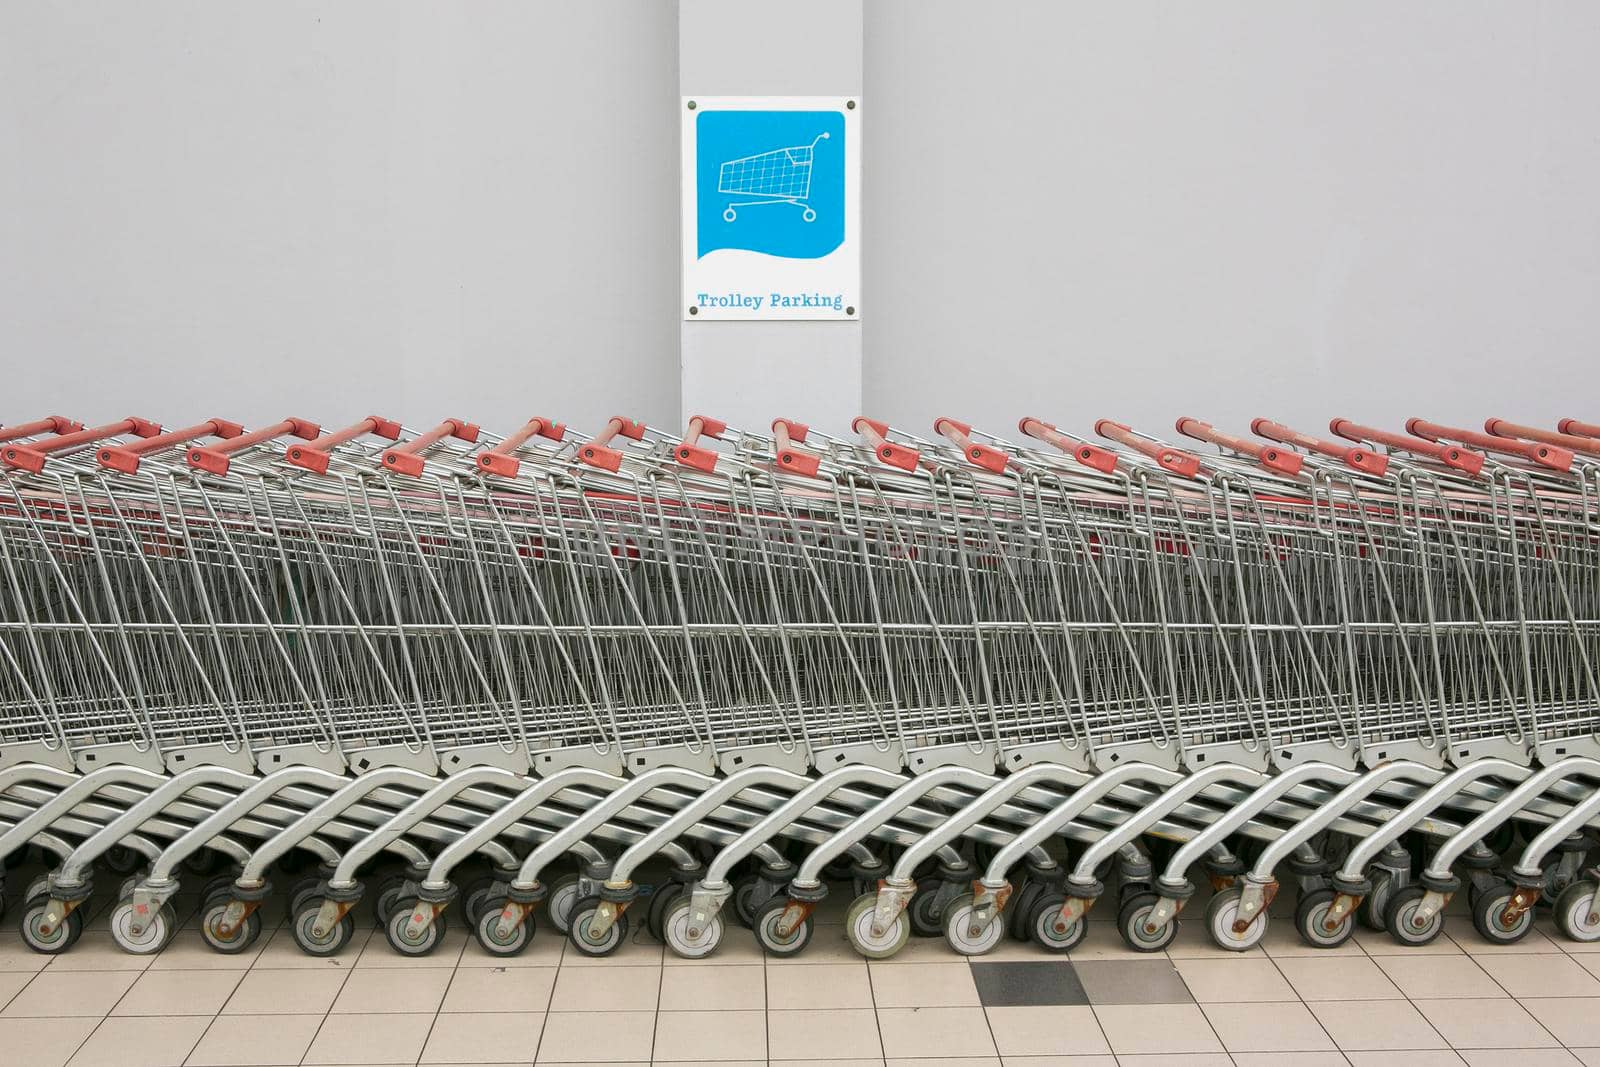 The cart is arranged neatly.